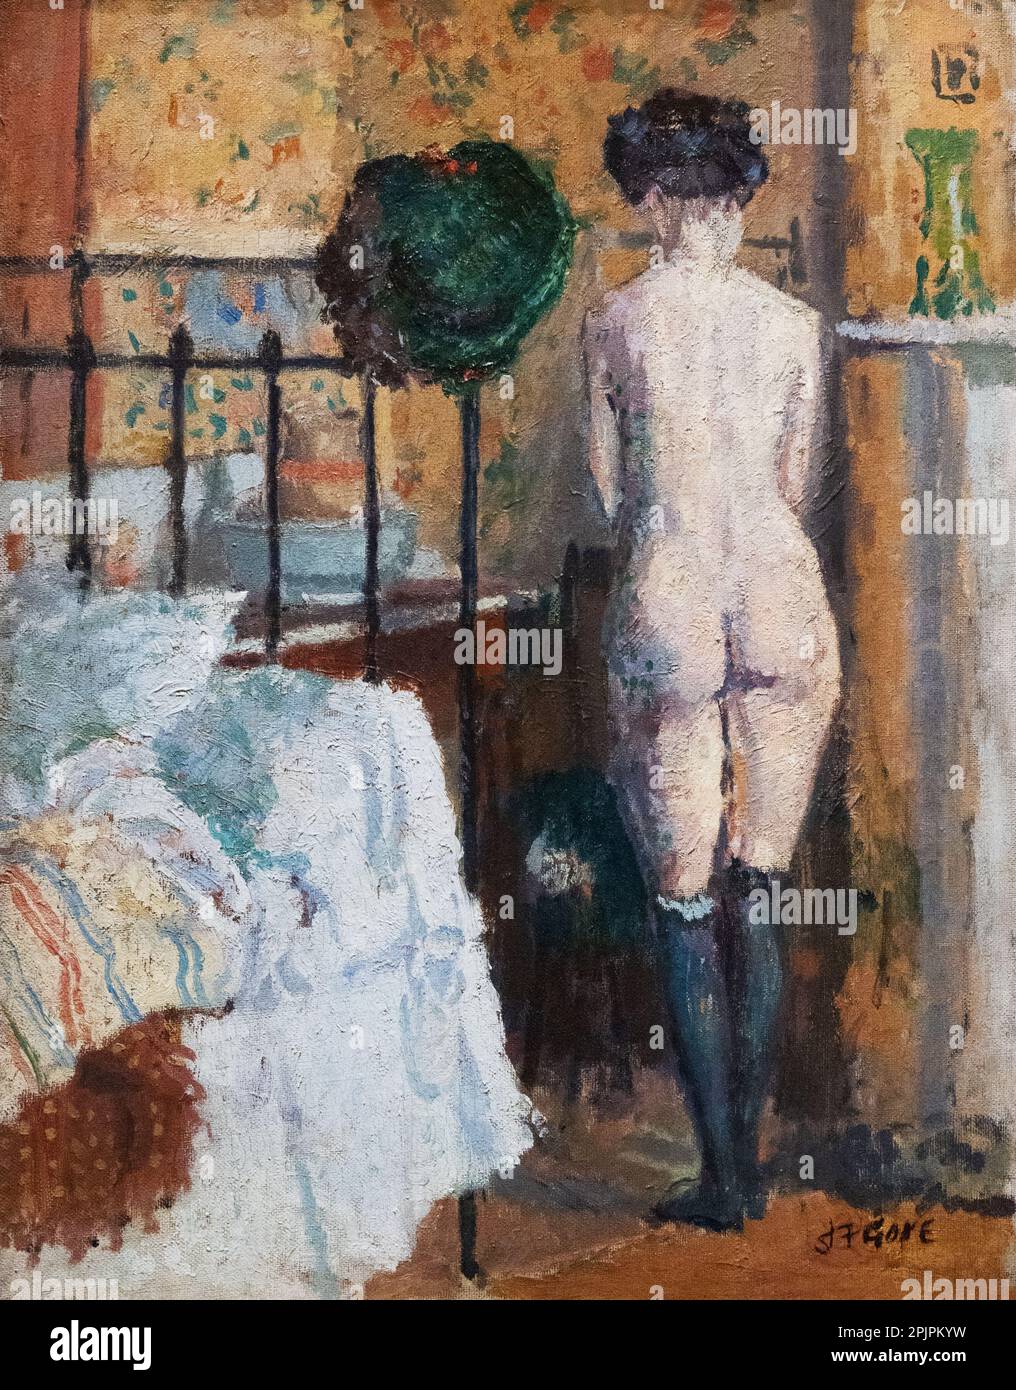 Spencer Frederick Gore painting; The Toilet; Oil on Canvas; British artist with links to Degas and Sickert, late 19th and early 20th century Stock Photo